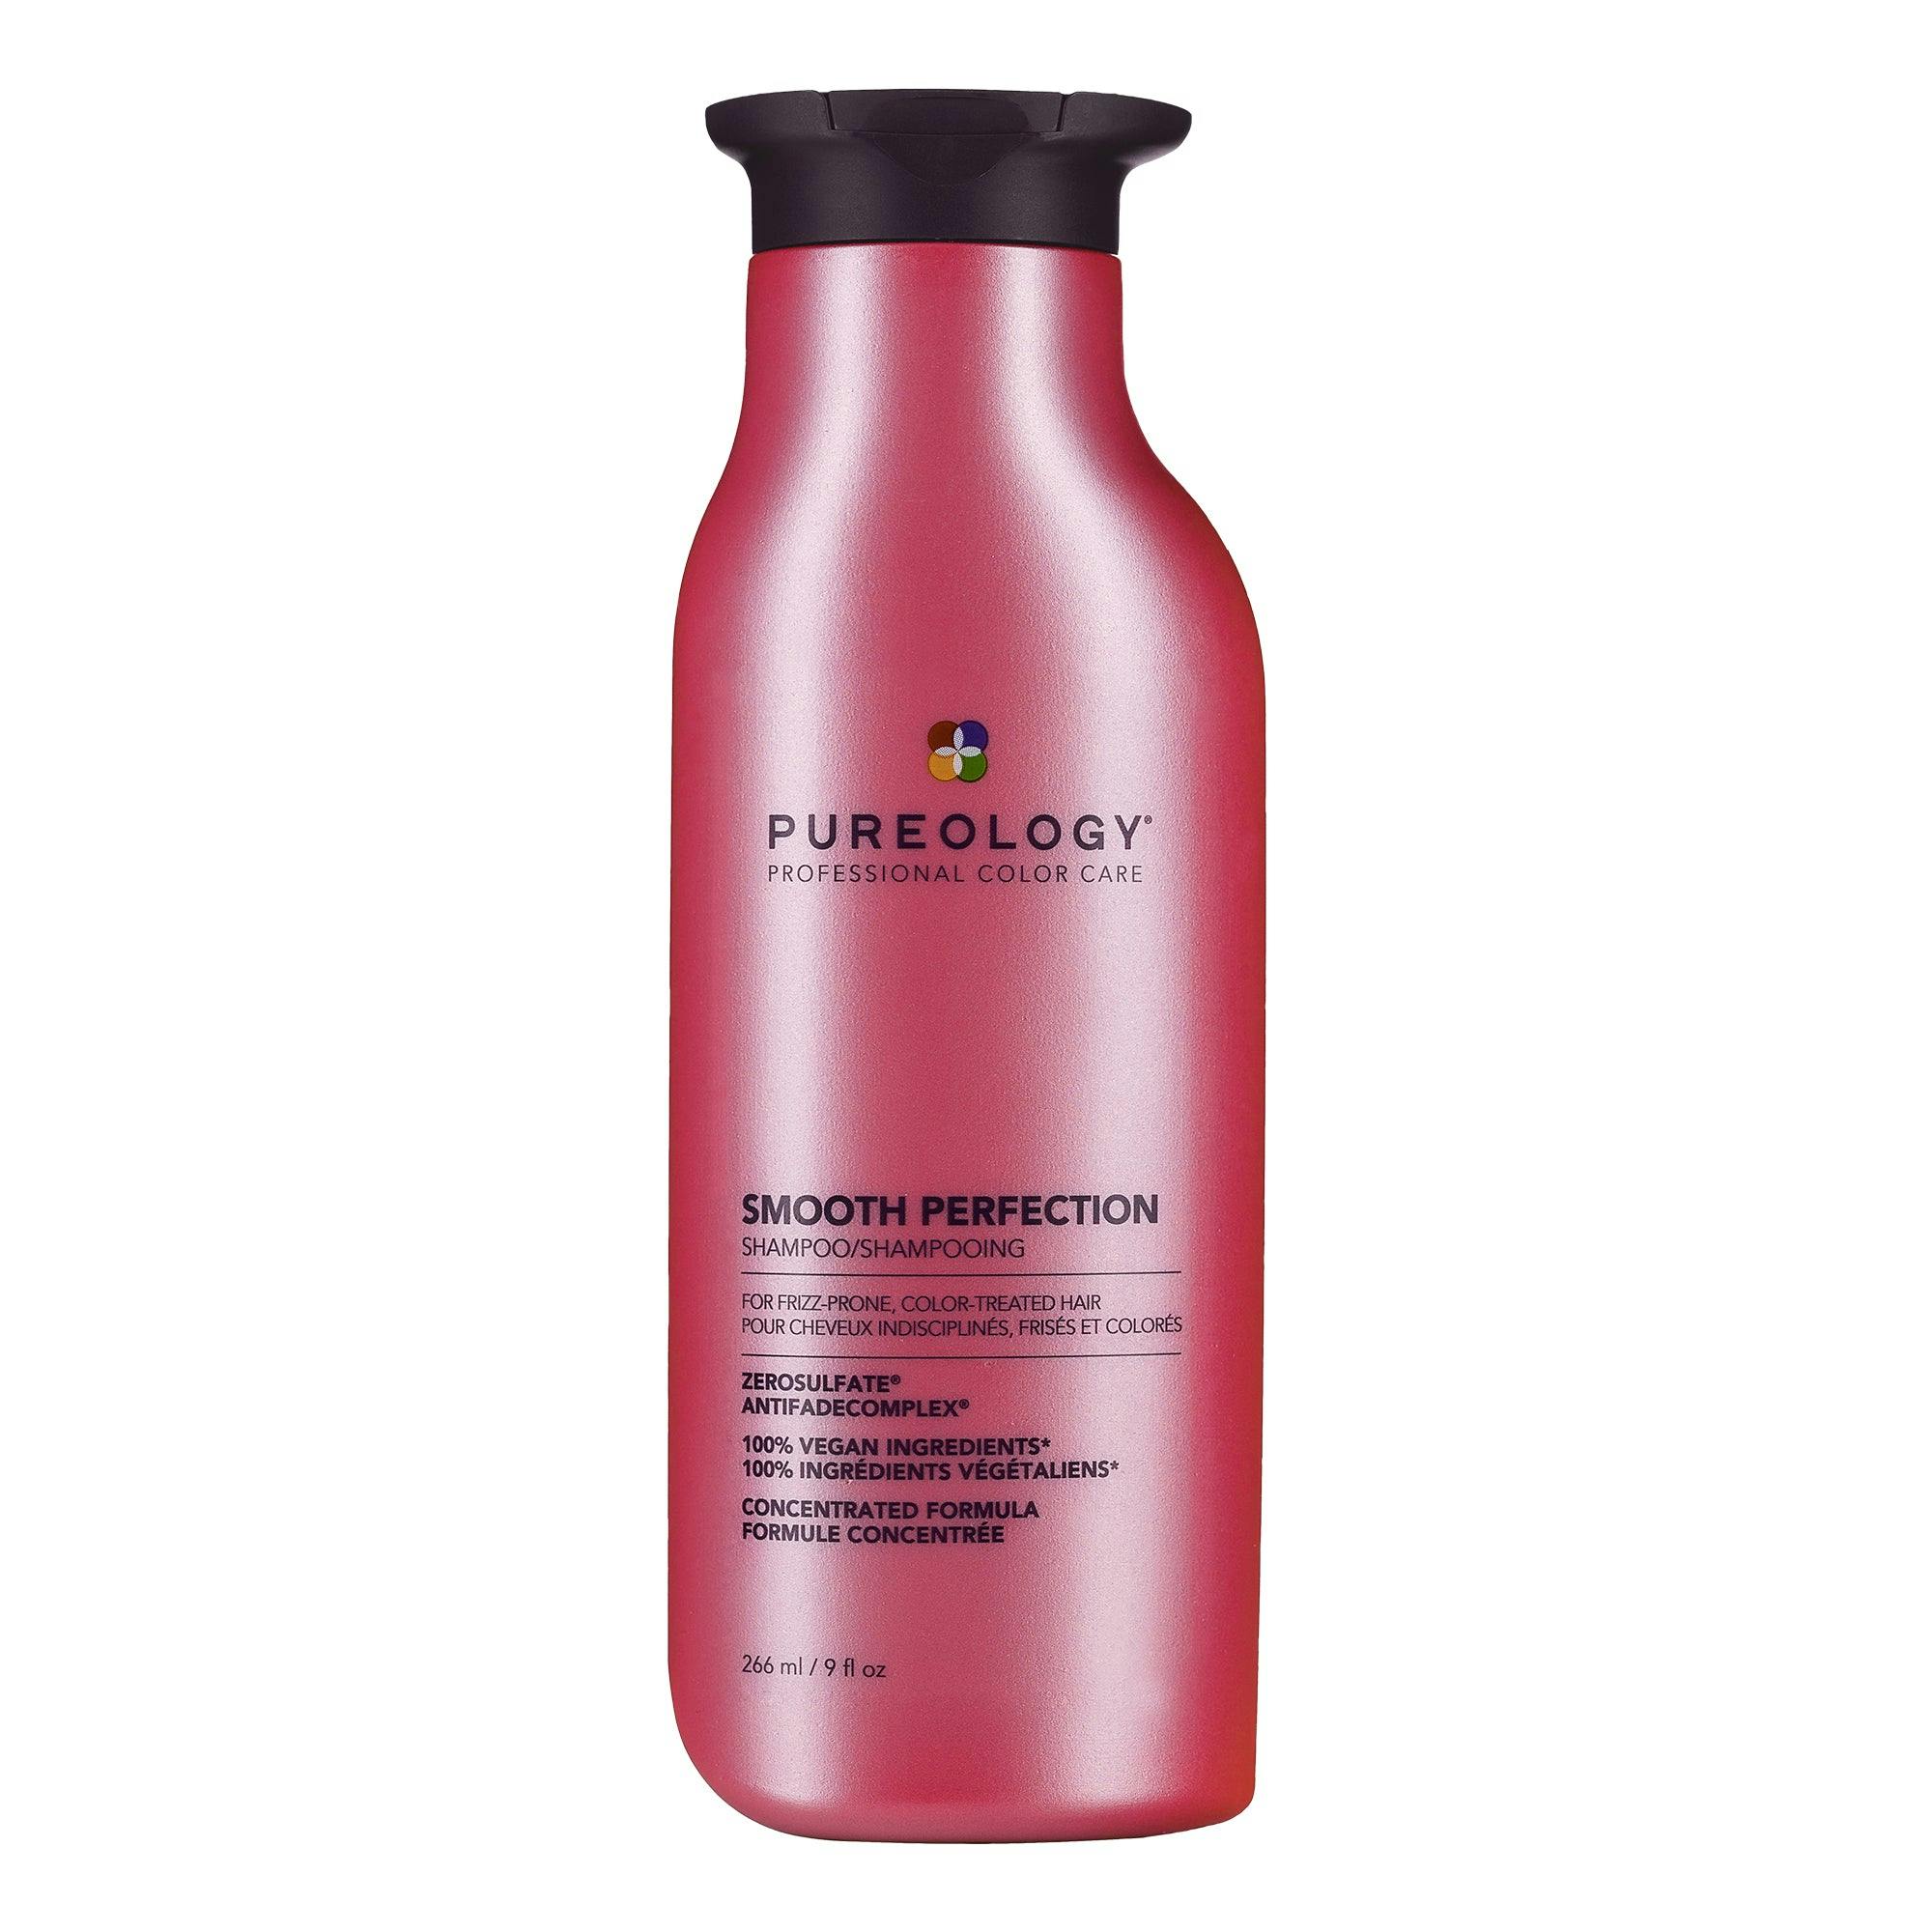 Pureology Smooth Perfection Shampoo and Conditioner Duo Bundle